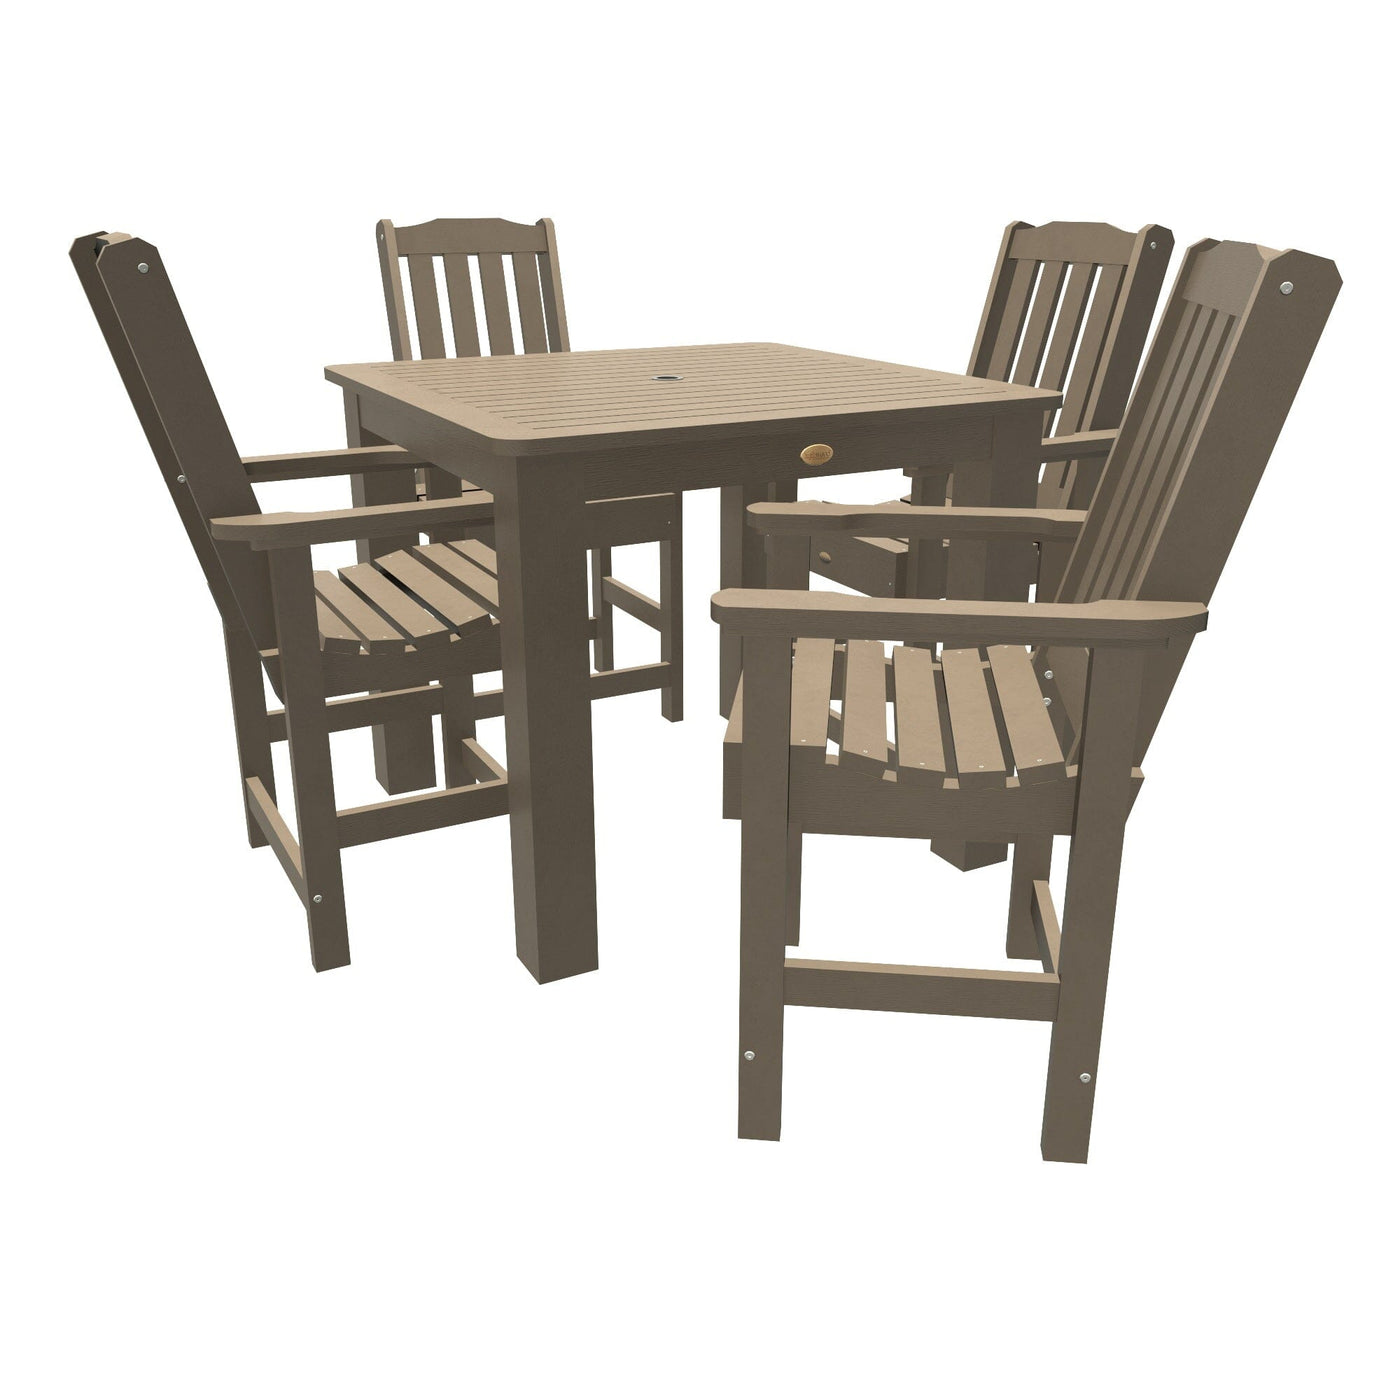 Lehigh 5pc Square Dining Set 42in x 42in - Counter Height Dining Highwood USA Woodland Brown 